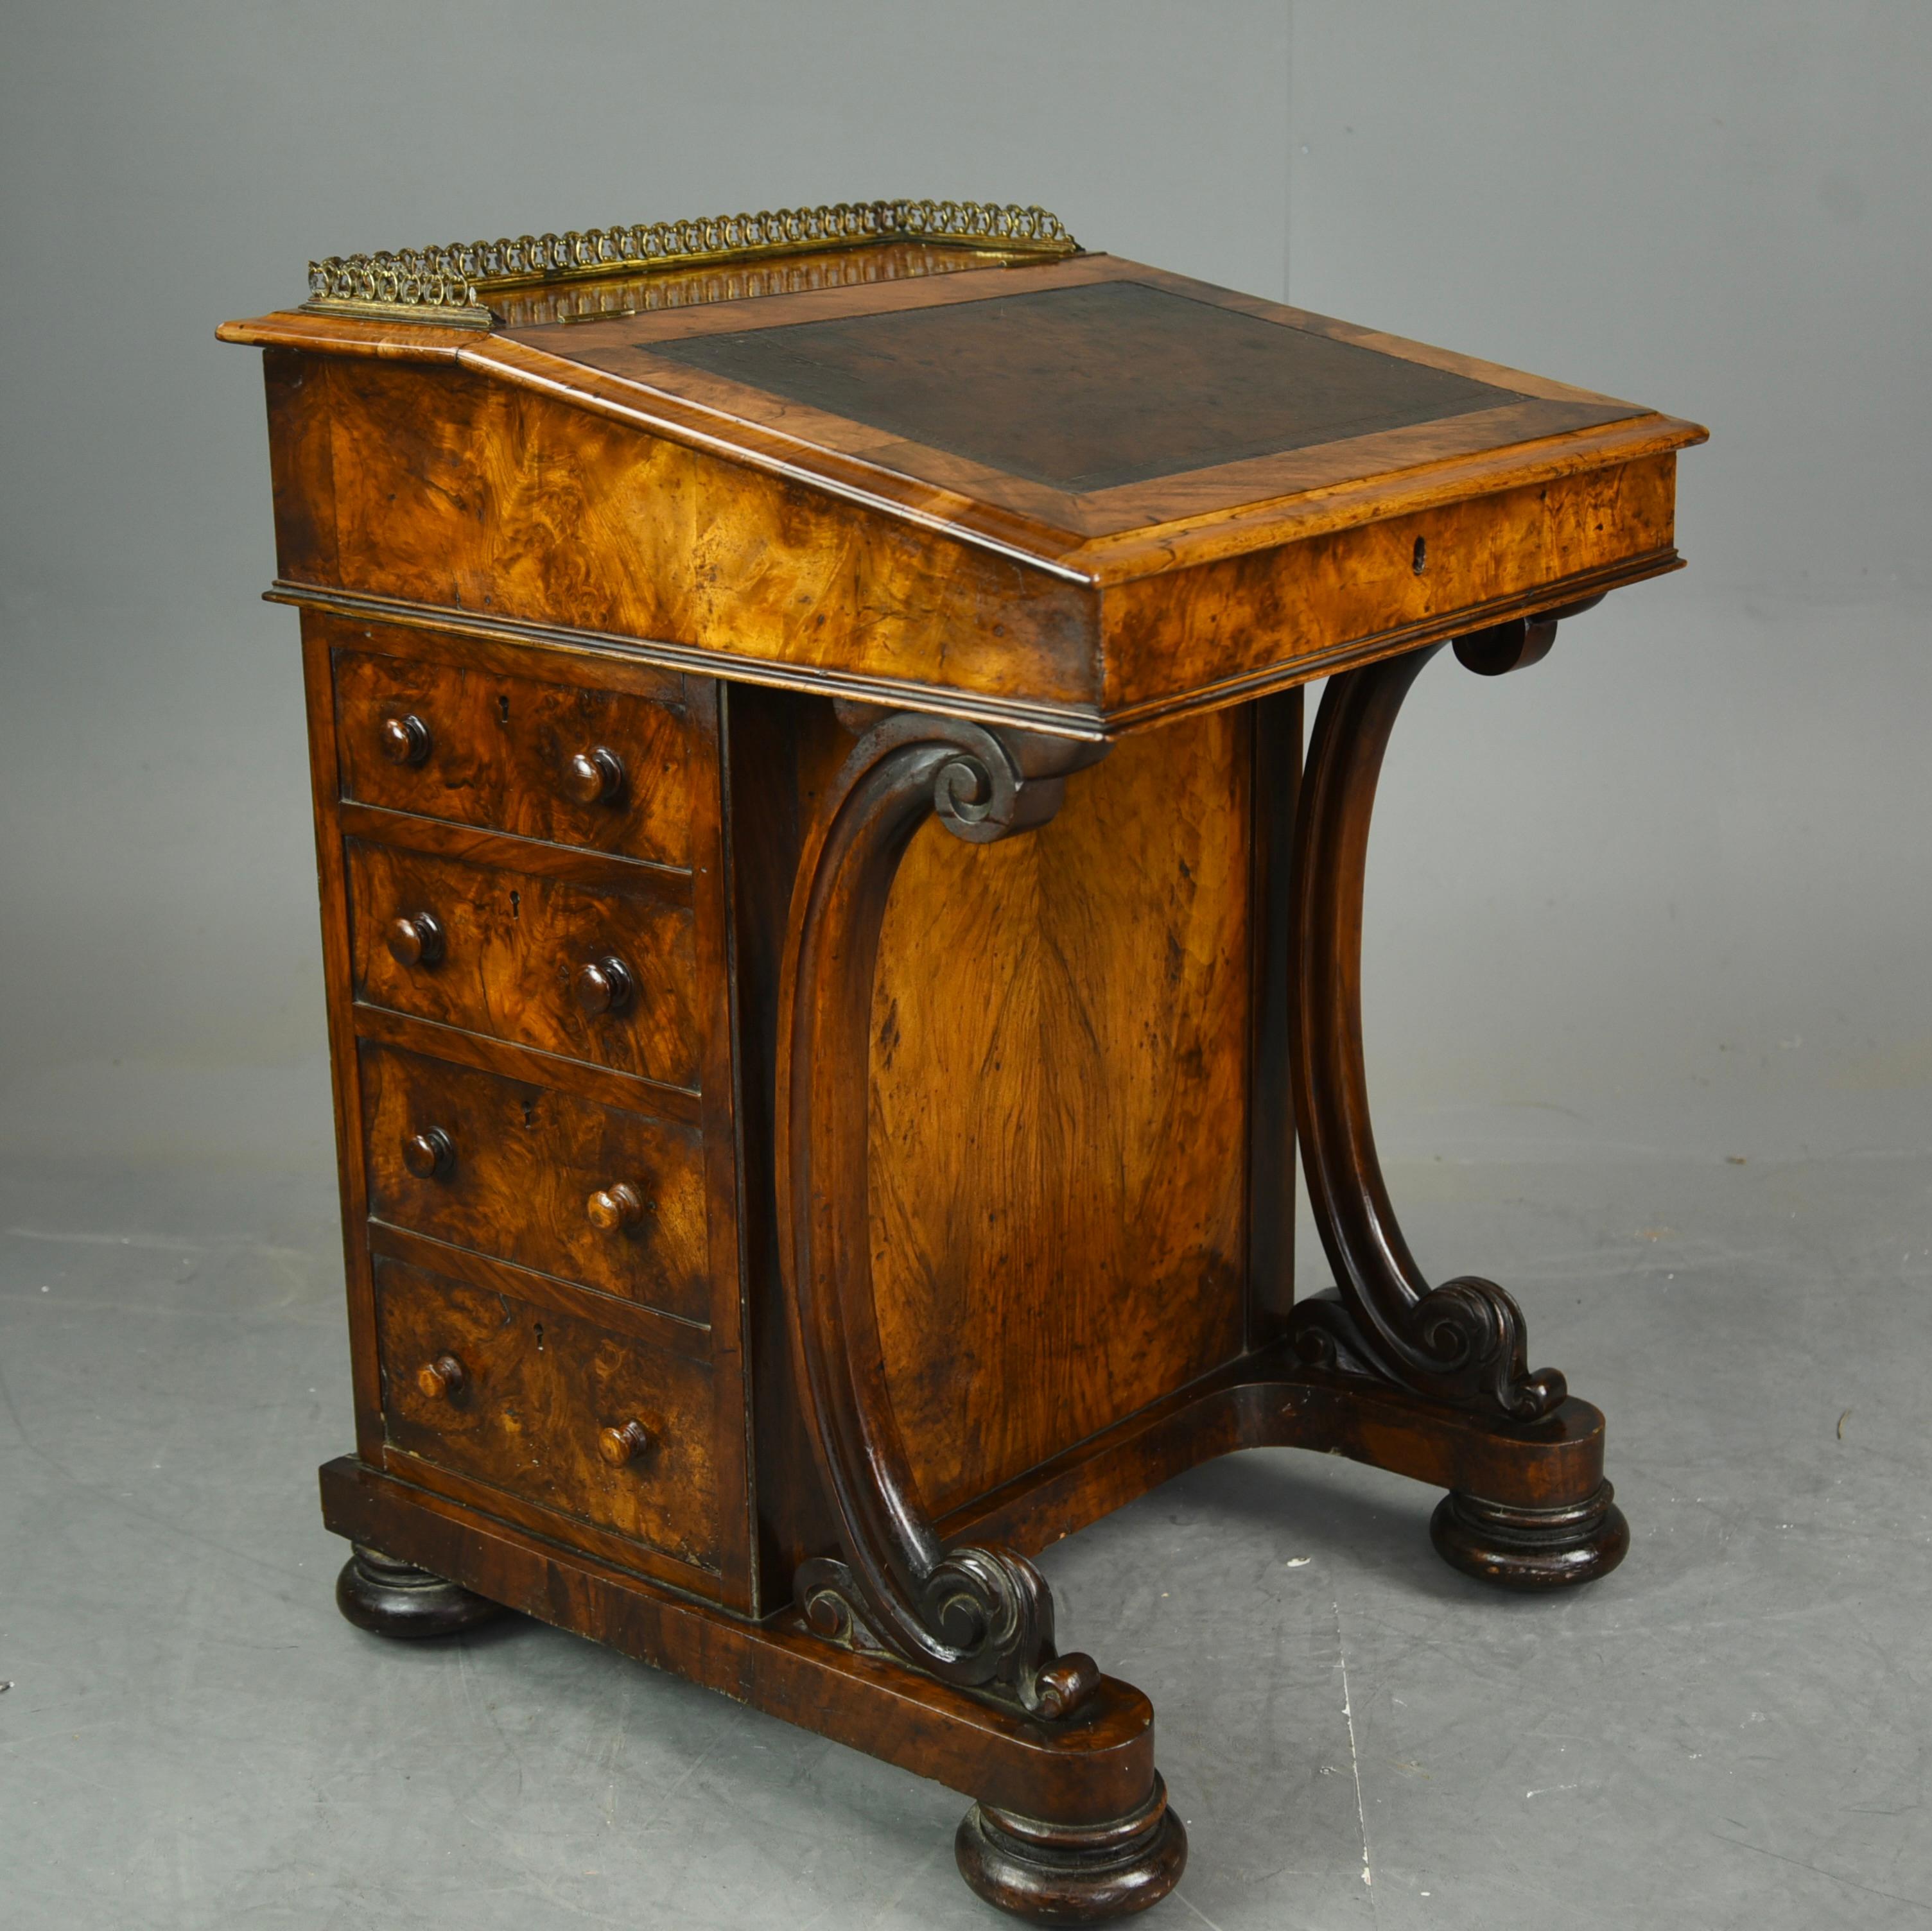 Outstanding quality antique Victorian burr walnut davenport having a gallery top above a lift up top with the original brown leather writing surface cross banded in walnut. The top opens to reveal a fitted interior with two drawers and two dummy